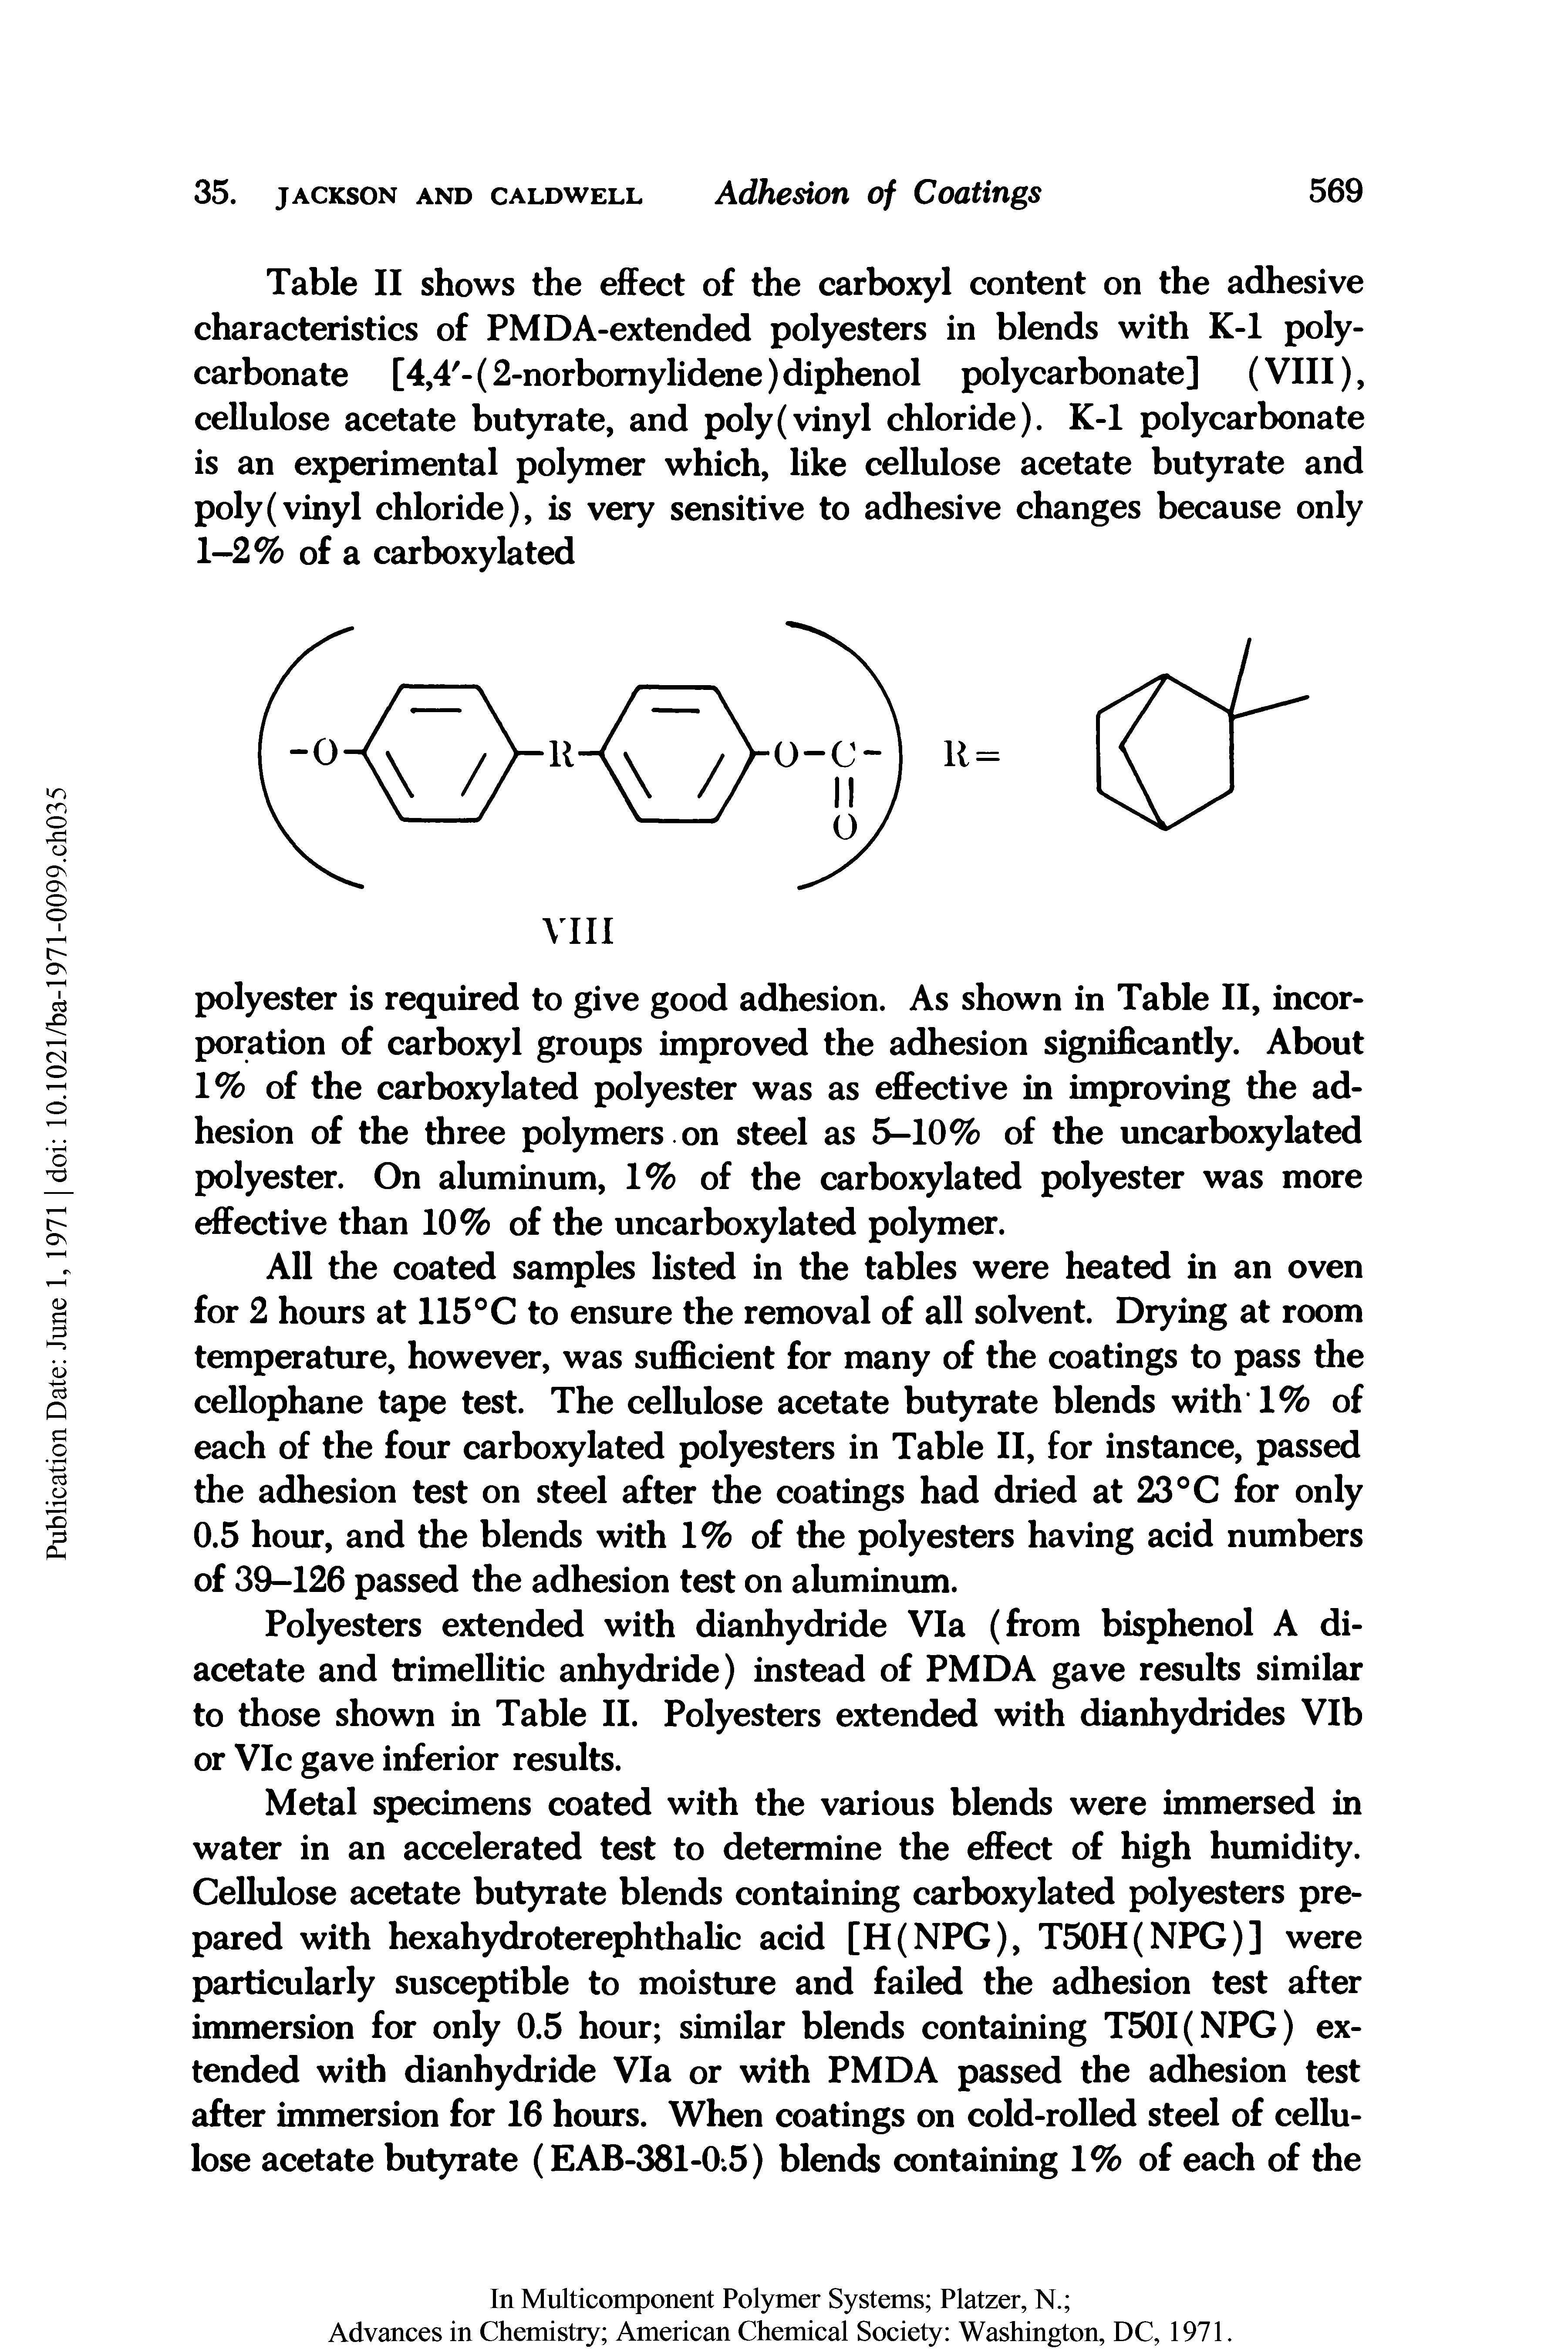 Table II shows the effect of the carboxyl content on the adhesive characteristics of PMDA-extended polyesters in blends with K-l polycarbonate [4,4 - (2-norbomylidene) diphenol polycarbonate] (VIII), cellulose acetate butyrate, and poly (vinyl chloride). K-l polycarbonate is an experimental polymer which, like cellulose acetate butyrate and poly (vinyl chloride), is very sensitive to adhesive changes because only 1-2% of a carboxylated...